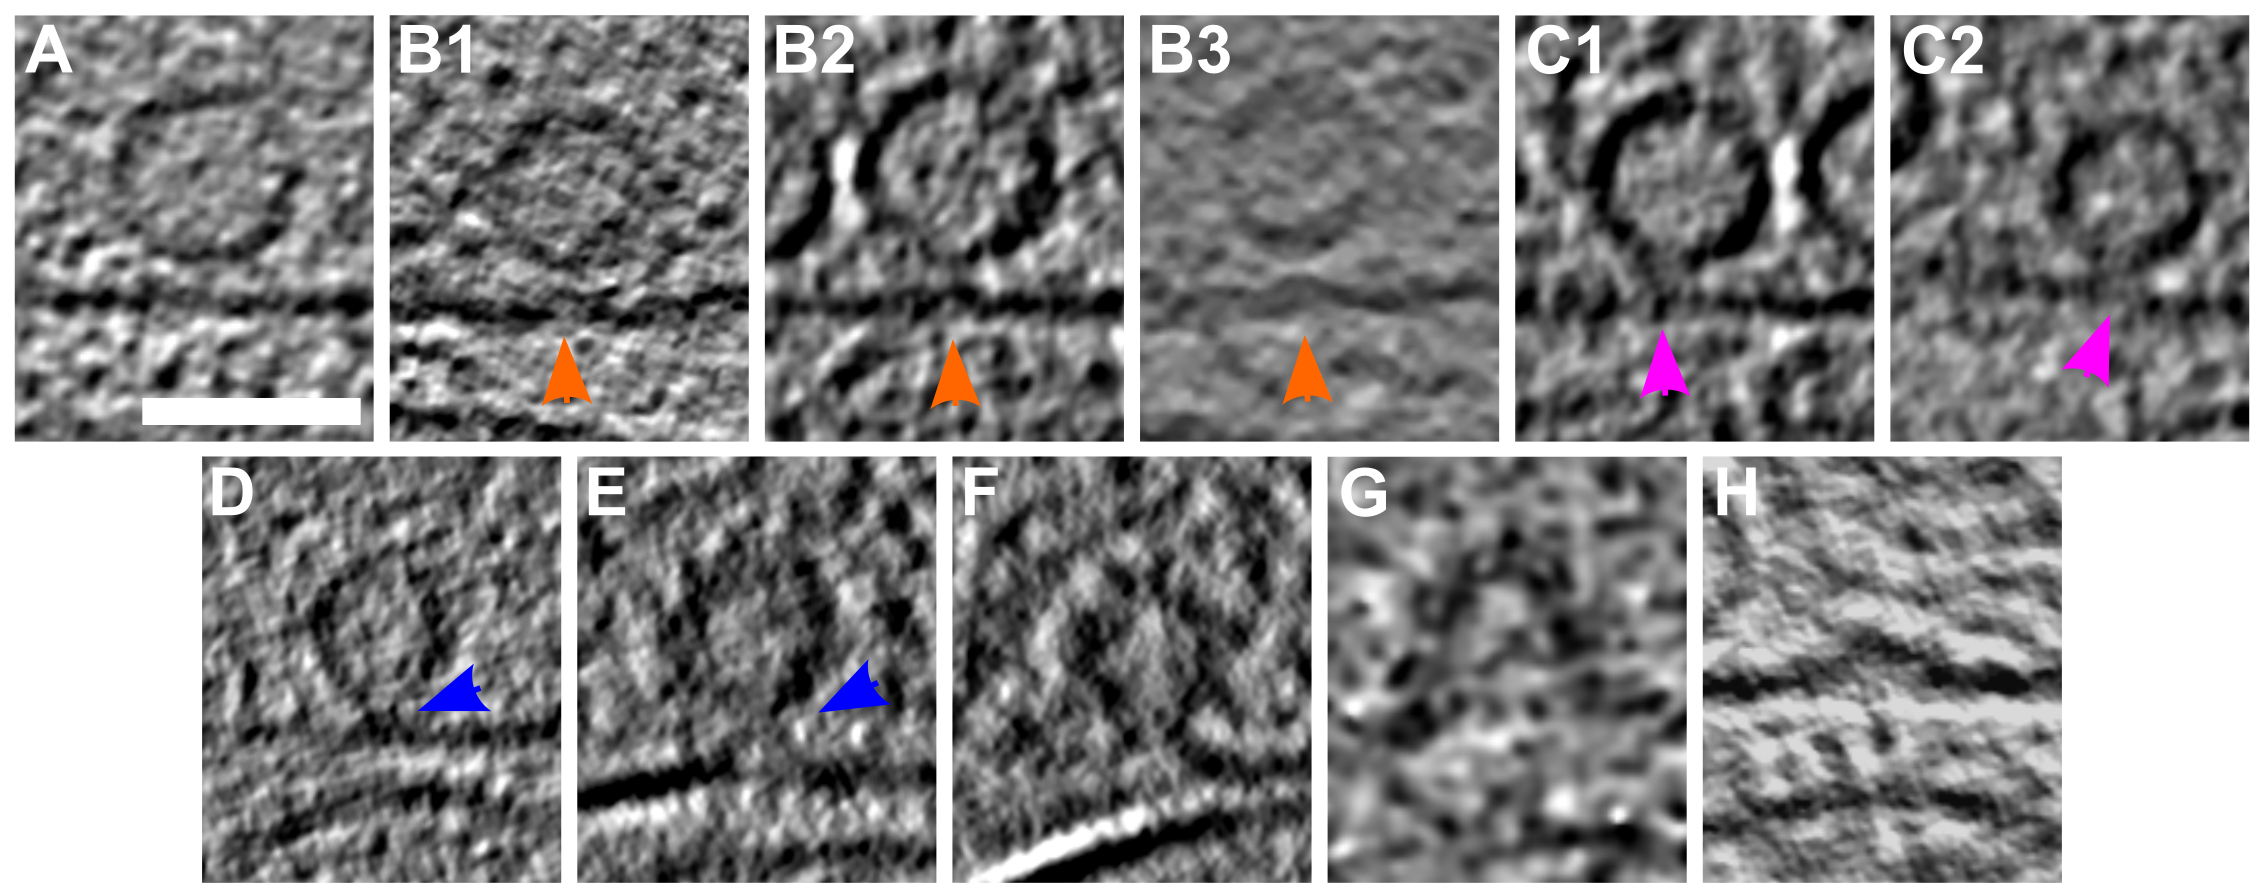 Figure 2: SV exocytosis morphology. Tomographic slice of non-stimulated (A) and stimulated rat synaptosomes (B-H). A) Image of a 2.2-nm thick tomographic slice showing a non-stimulated with SVs at the AZ and a straight PM. B1) Membrane curvature event, 2.2-nm thick tomographic slice. B2) Membrane curvature event, 6.5-nm thick tomographic slice. B3) Membrane curvature event, 2.24 nm thick tomographic slice. Orange arrows showing membrane curvature event. C1,C2) Lipid perturbations of PM and SV, 22-nm thick tomographic slices. The space between SV and PM is denser than in the non-stimulated synaptosomes (see pink arrow). D-F) Vesicles with a pore opening that might be on the way to full collapse fusion, 33-nm thick tomographic slice thickness: 22 nm (D), 30.8 (E), 33 nm (F). G) Wide pore opening, most likely on the way to full collapse fusion, 2.2-nm tomographic slice. H) Remaining bump at the end of full collapse fusion, 11-nm thick tomographic slice. Scale bar, 50 nm.